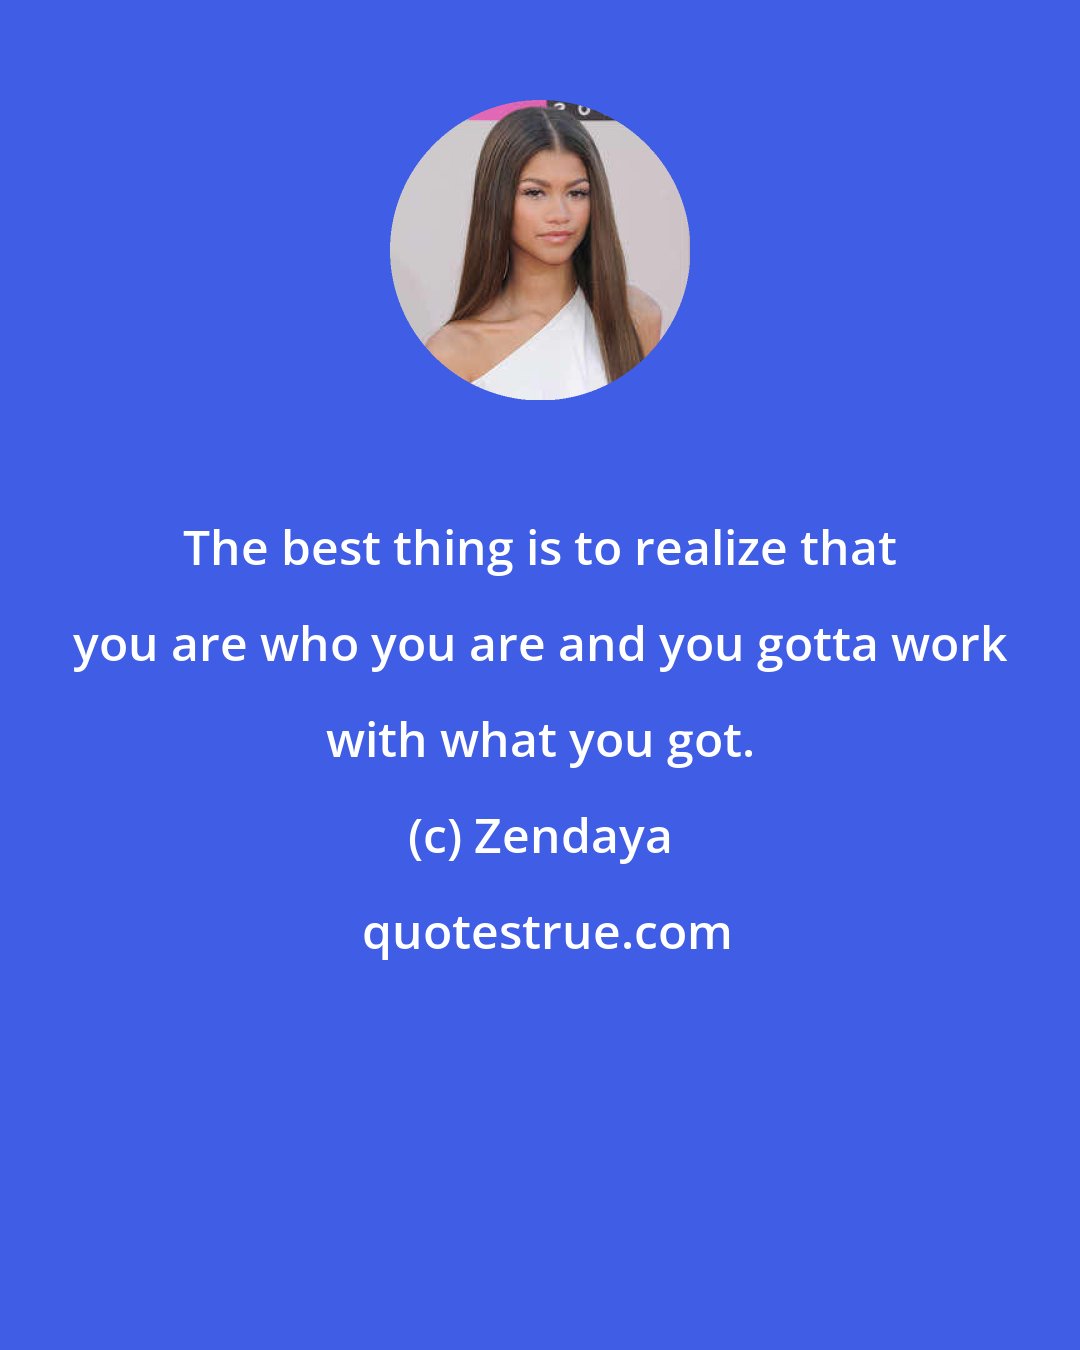 Zendaya: The best thing is to realize that you are who you are and you gotta work with what you got.